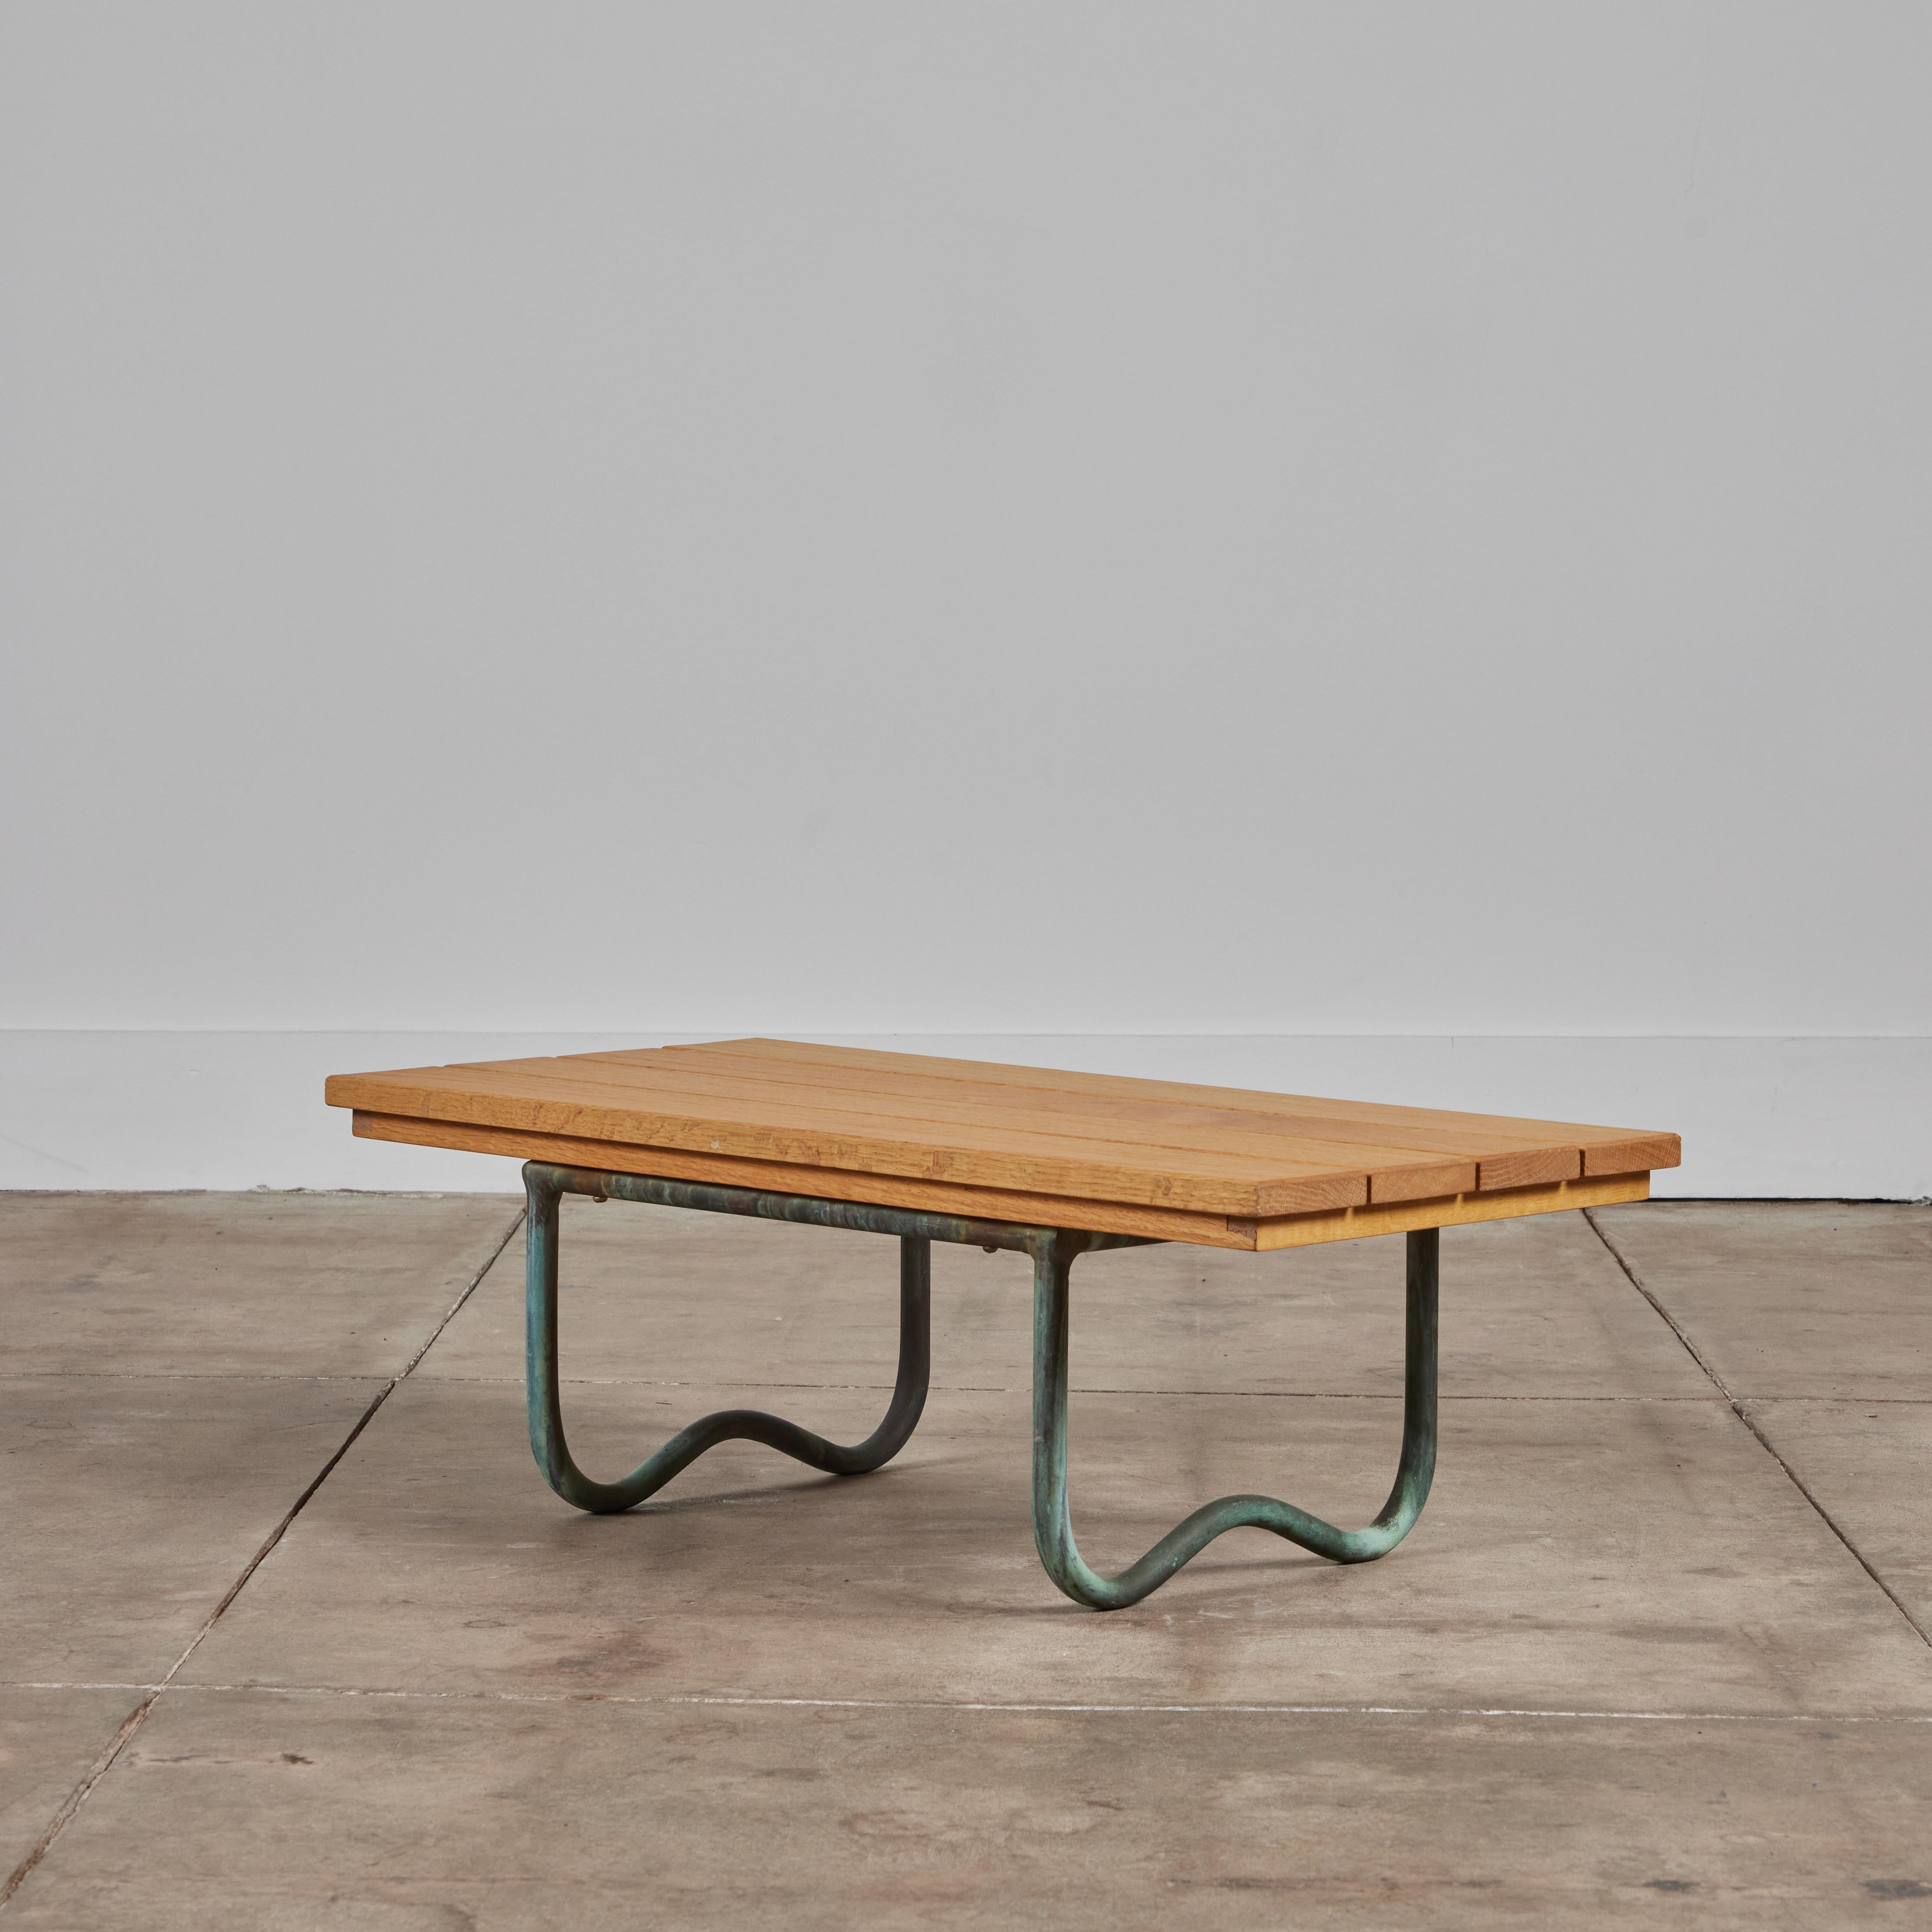 The WT-3715 Beach Table designed by Walter Lamb for Brown Jordan features a tubular bronze frame and a new oak slatted wood tabletop. Recalling Lamb’s earlier work, the table has molded curves in the runners that act as the feet of the piece.

The